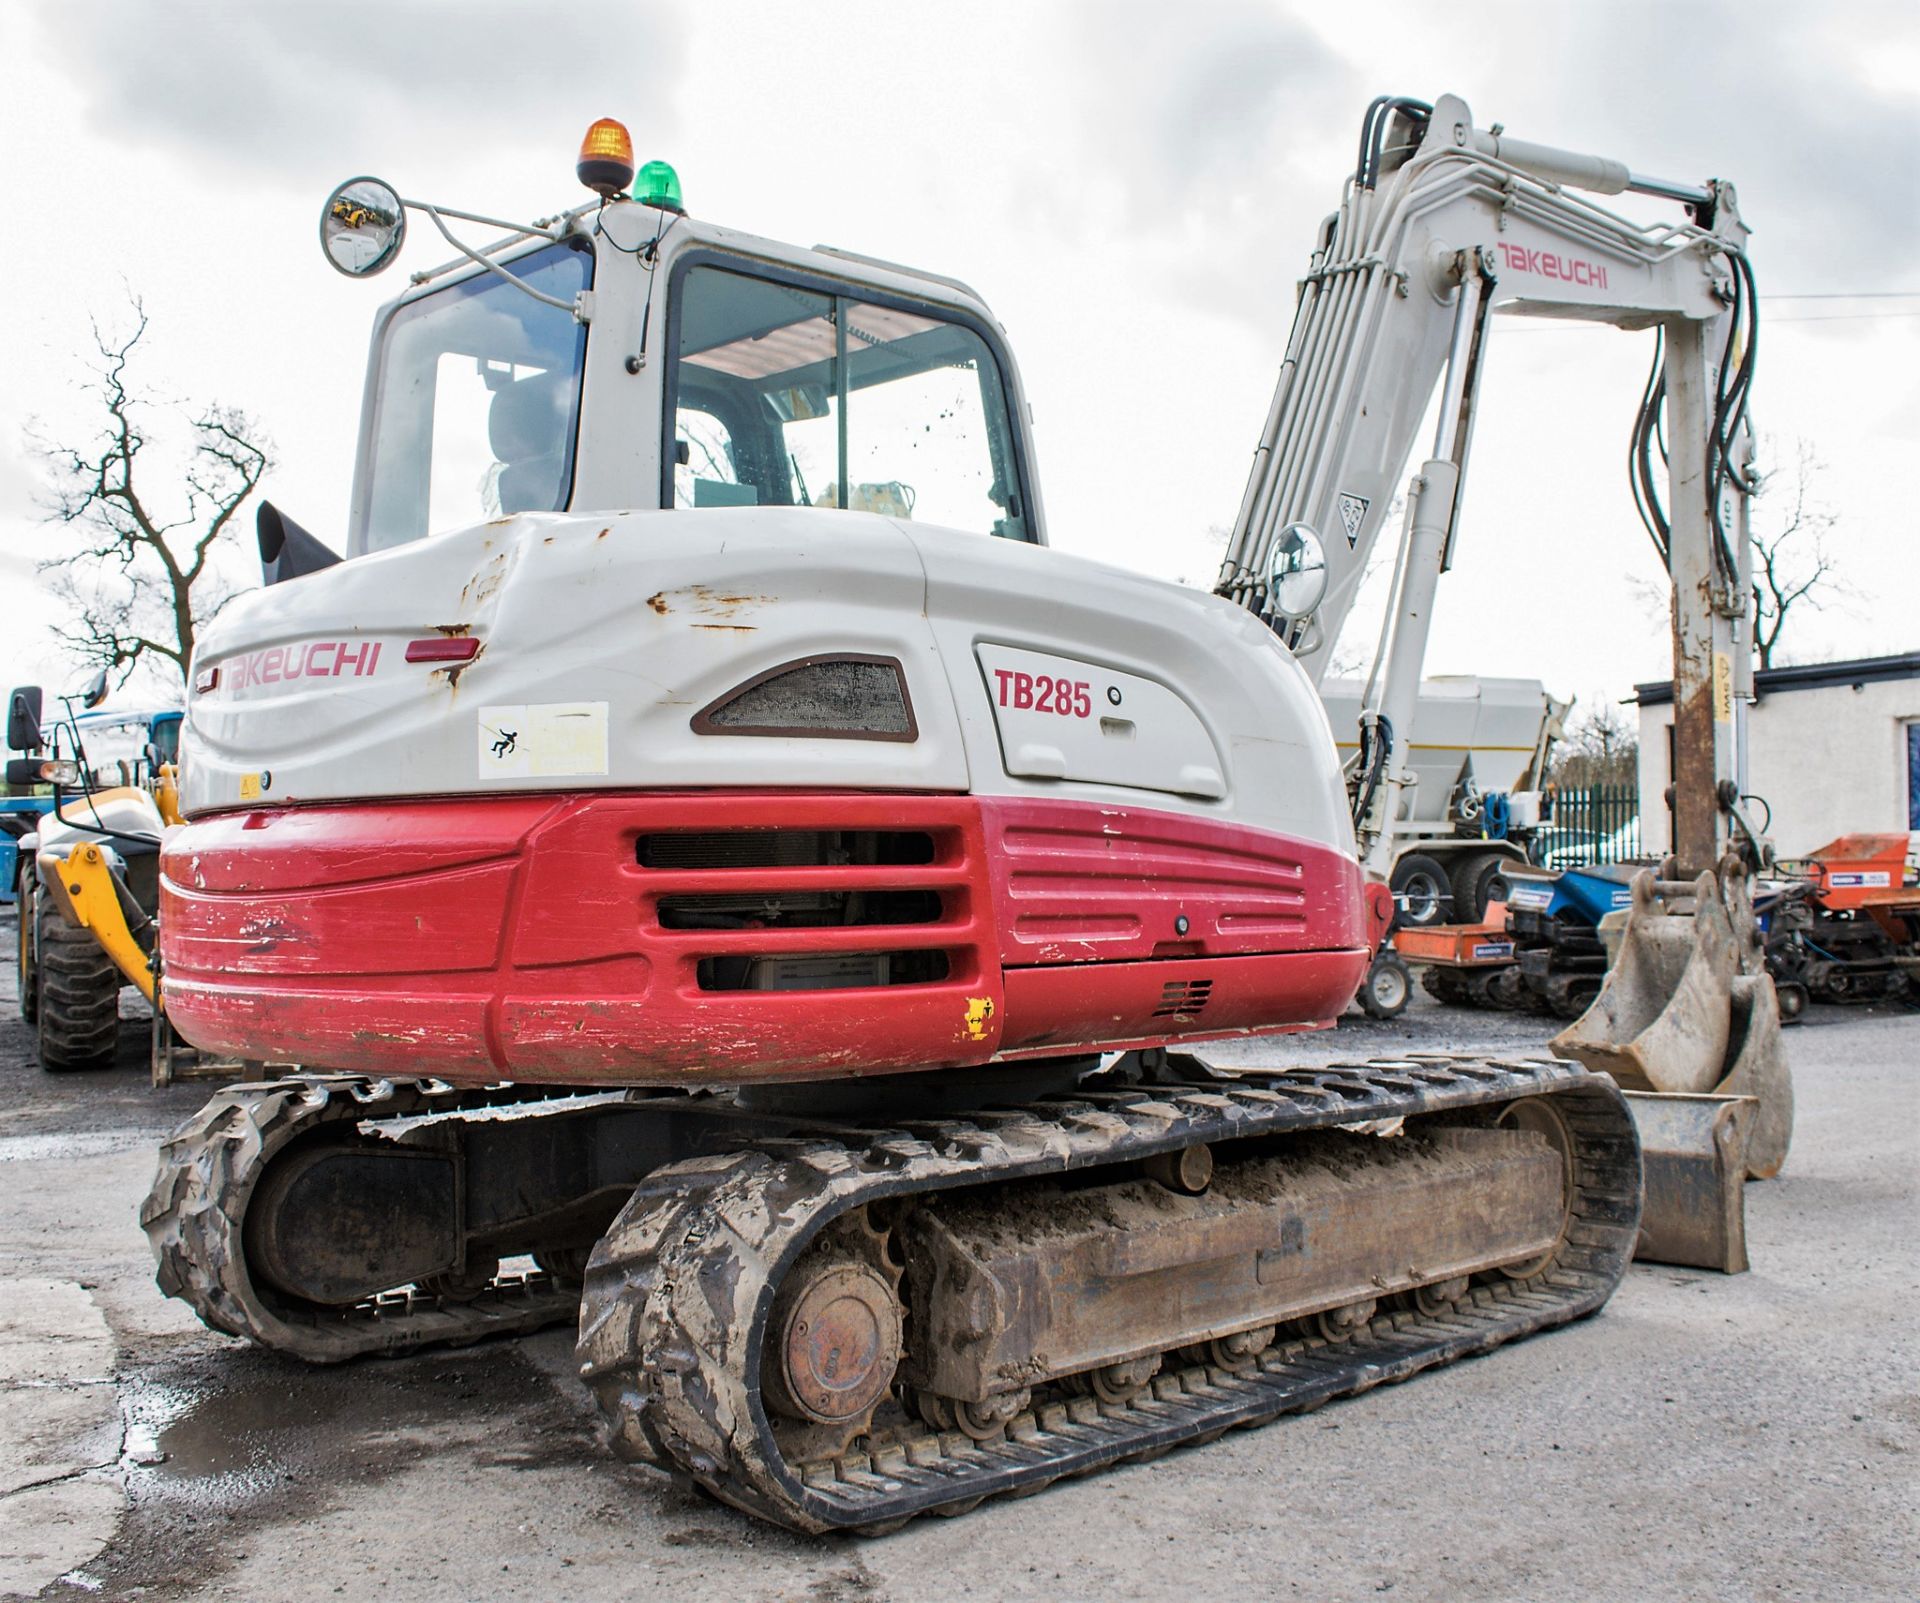 Takeuchi TB285 8.5 tonne rubber tracked excavator Year: 2012 S/N: 185000171 Recorded Hours: 6004 - Image 4 of 13